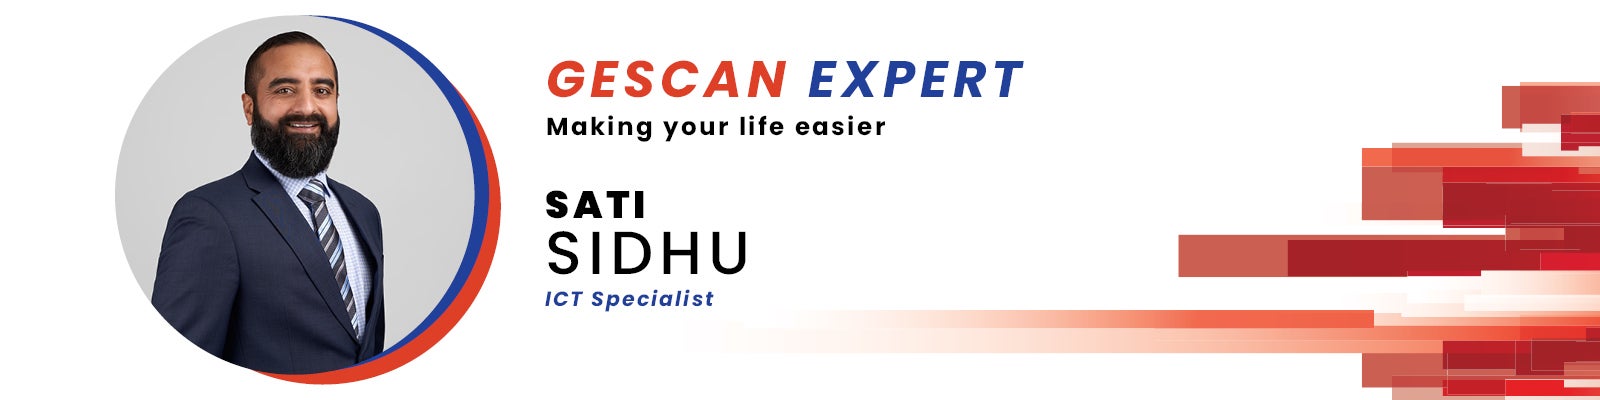 Sati offers expert ICT advice and services.